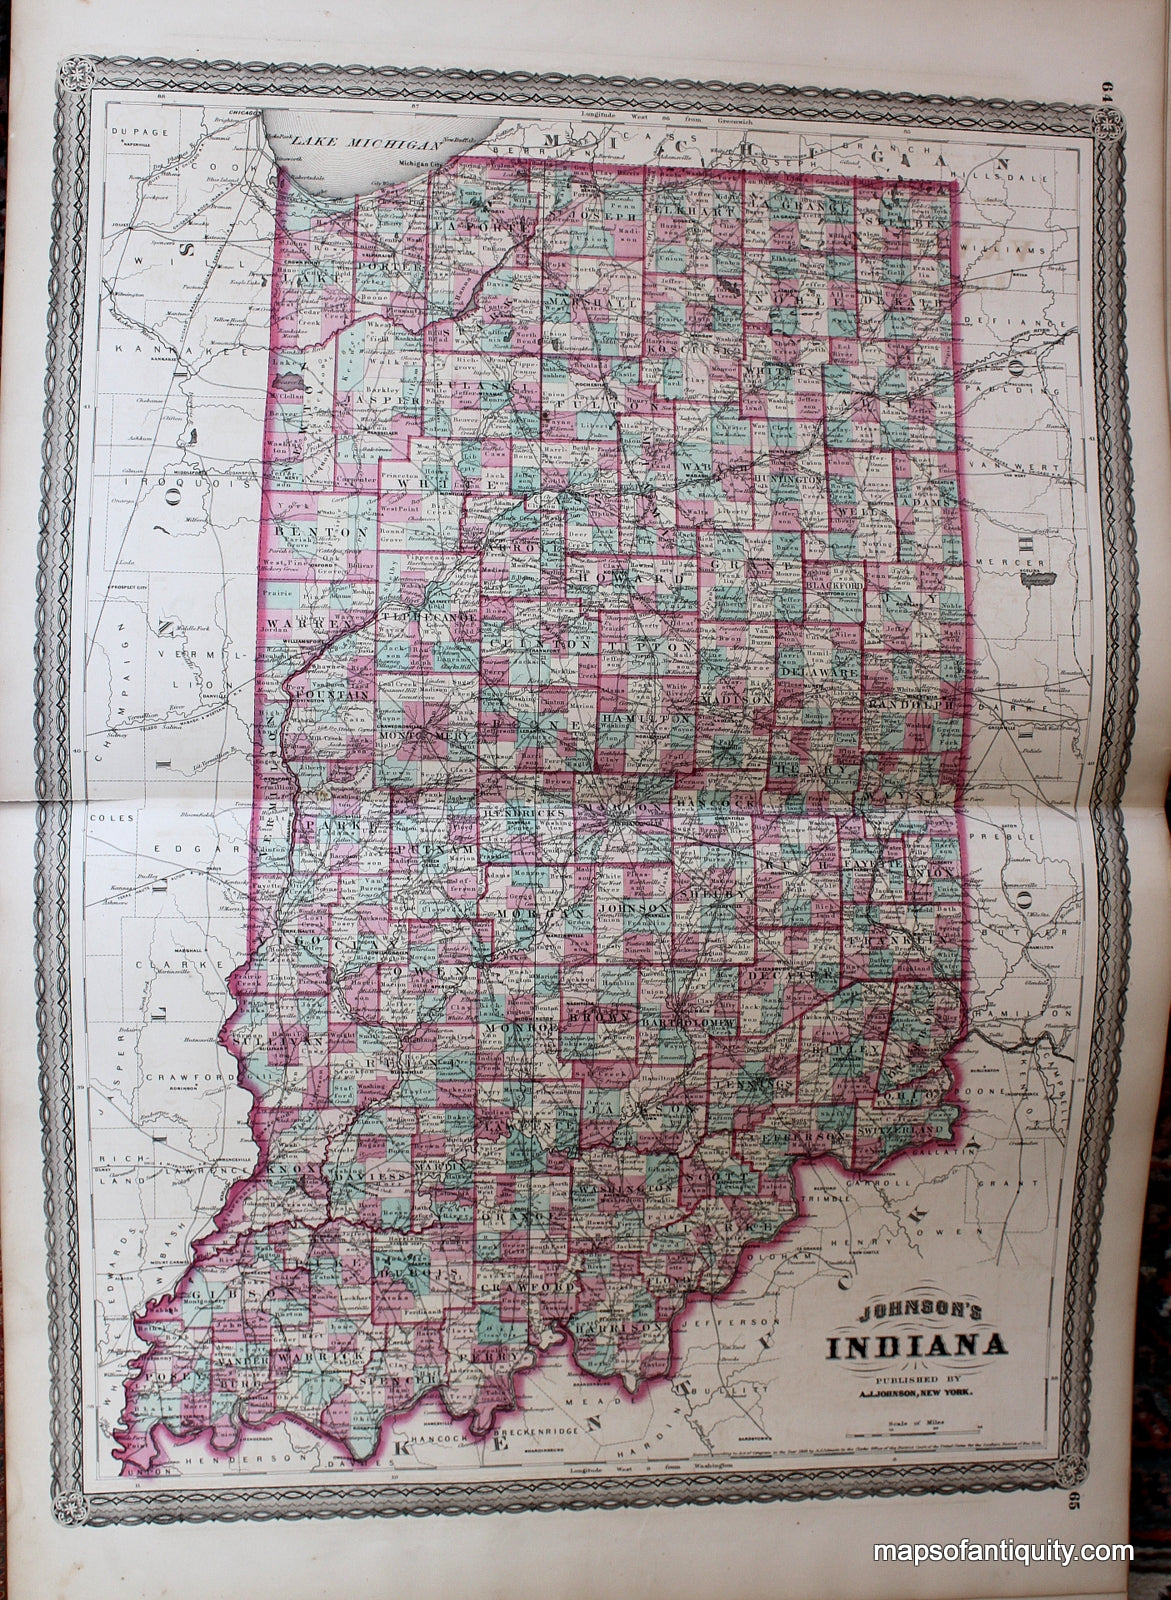 Antique-Hand-Colored-Map-Indiana-United-States-Midwest-1870-Johnson-Maps-Of-Antiquity